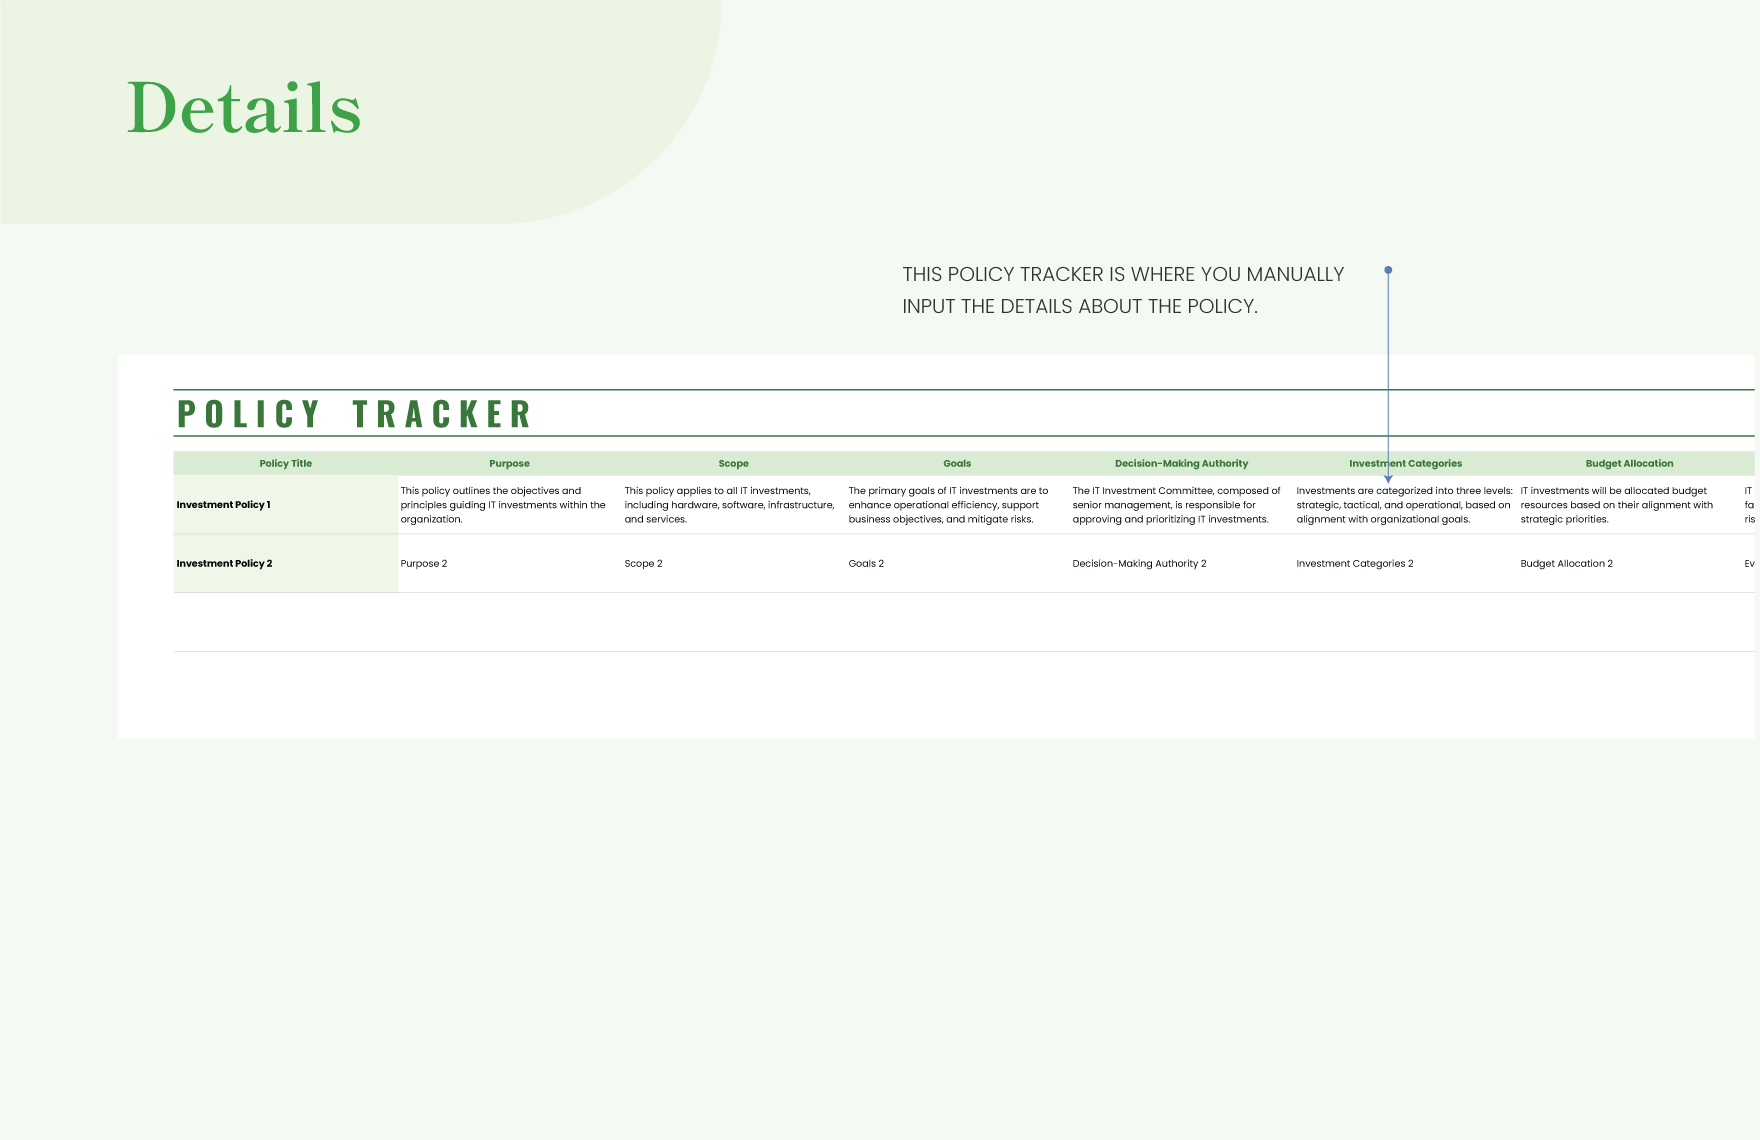 IT Investment Policy Statement Sheet Template